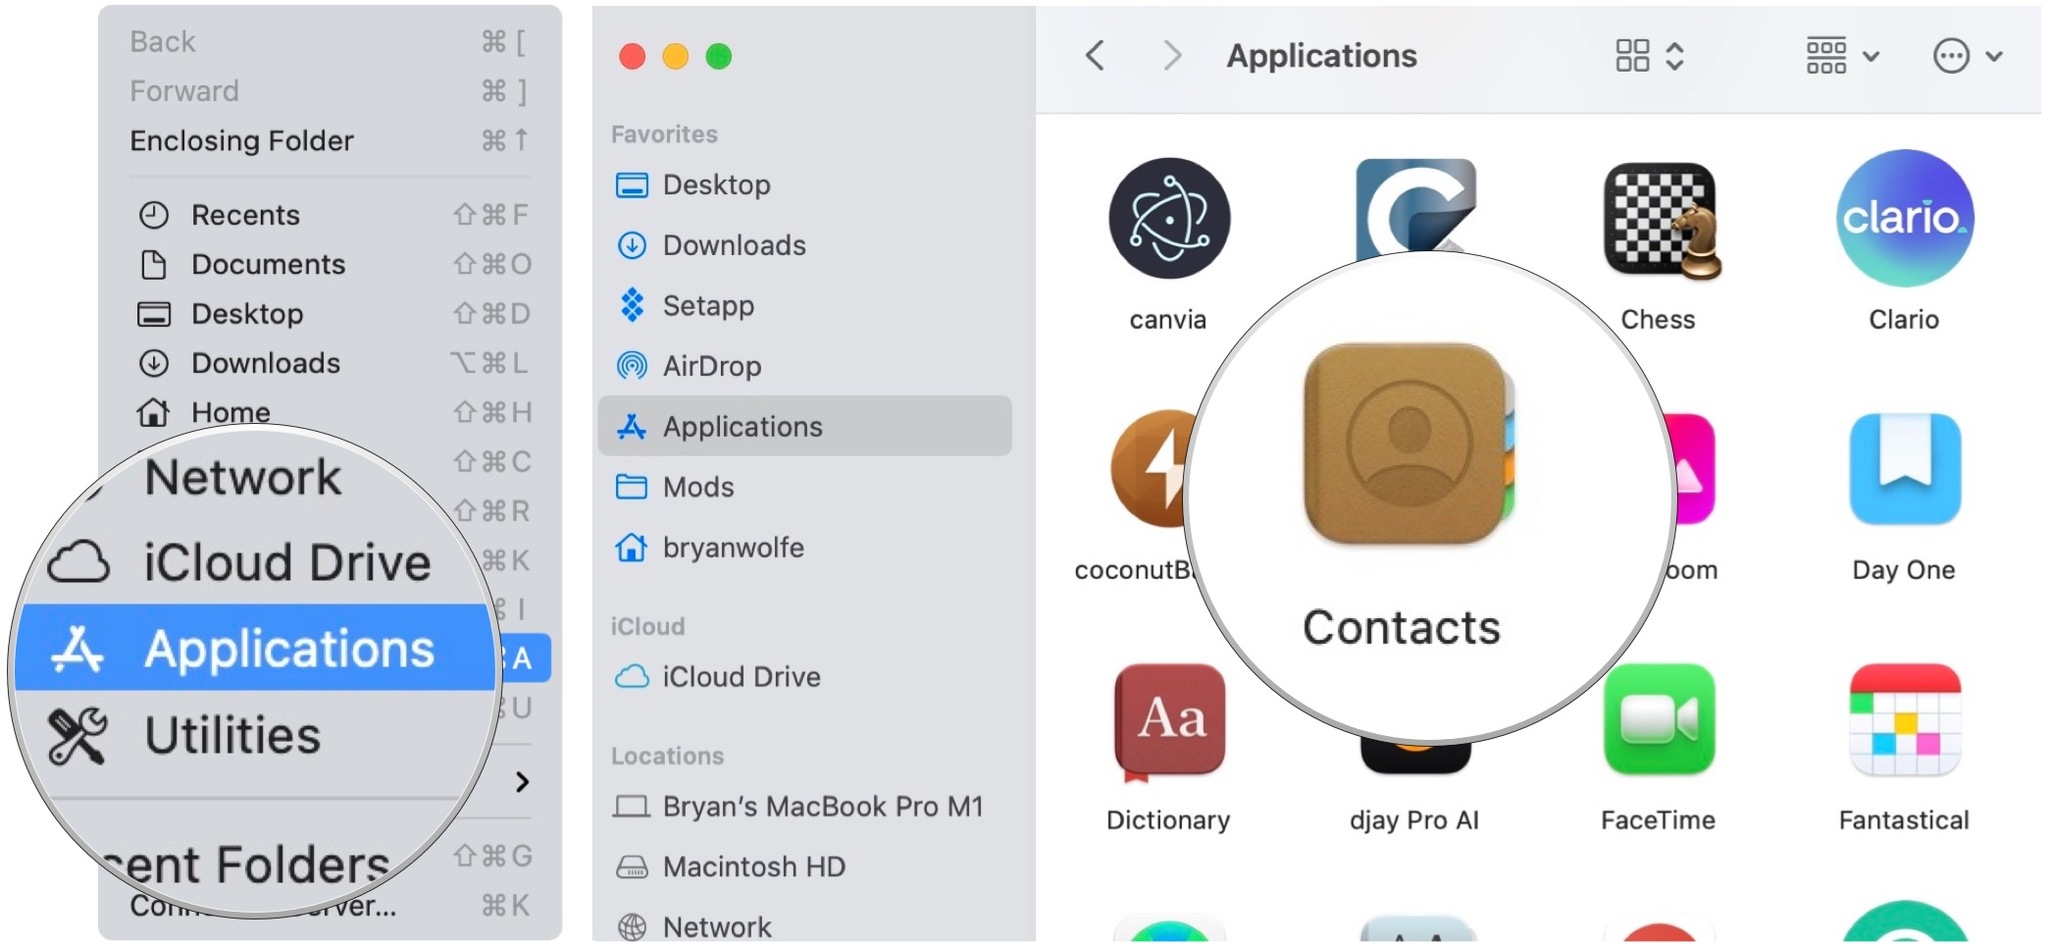 To make an RTT call on Mac, select Applications, then Contacts.